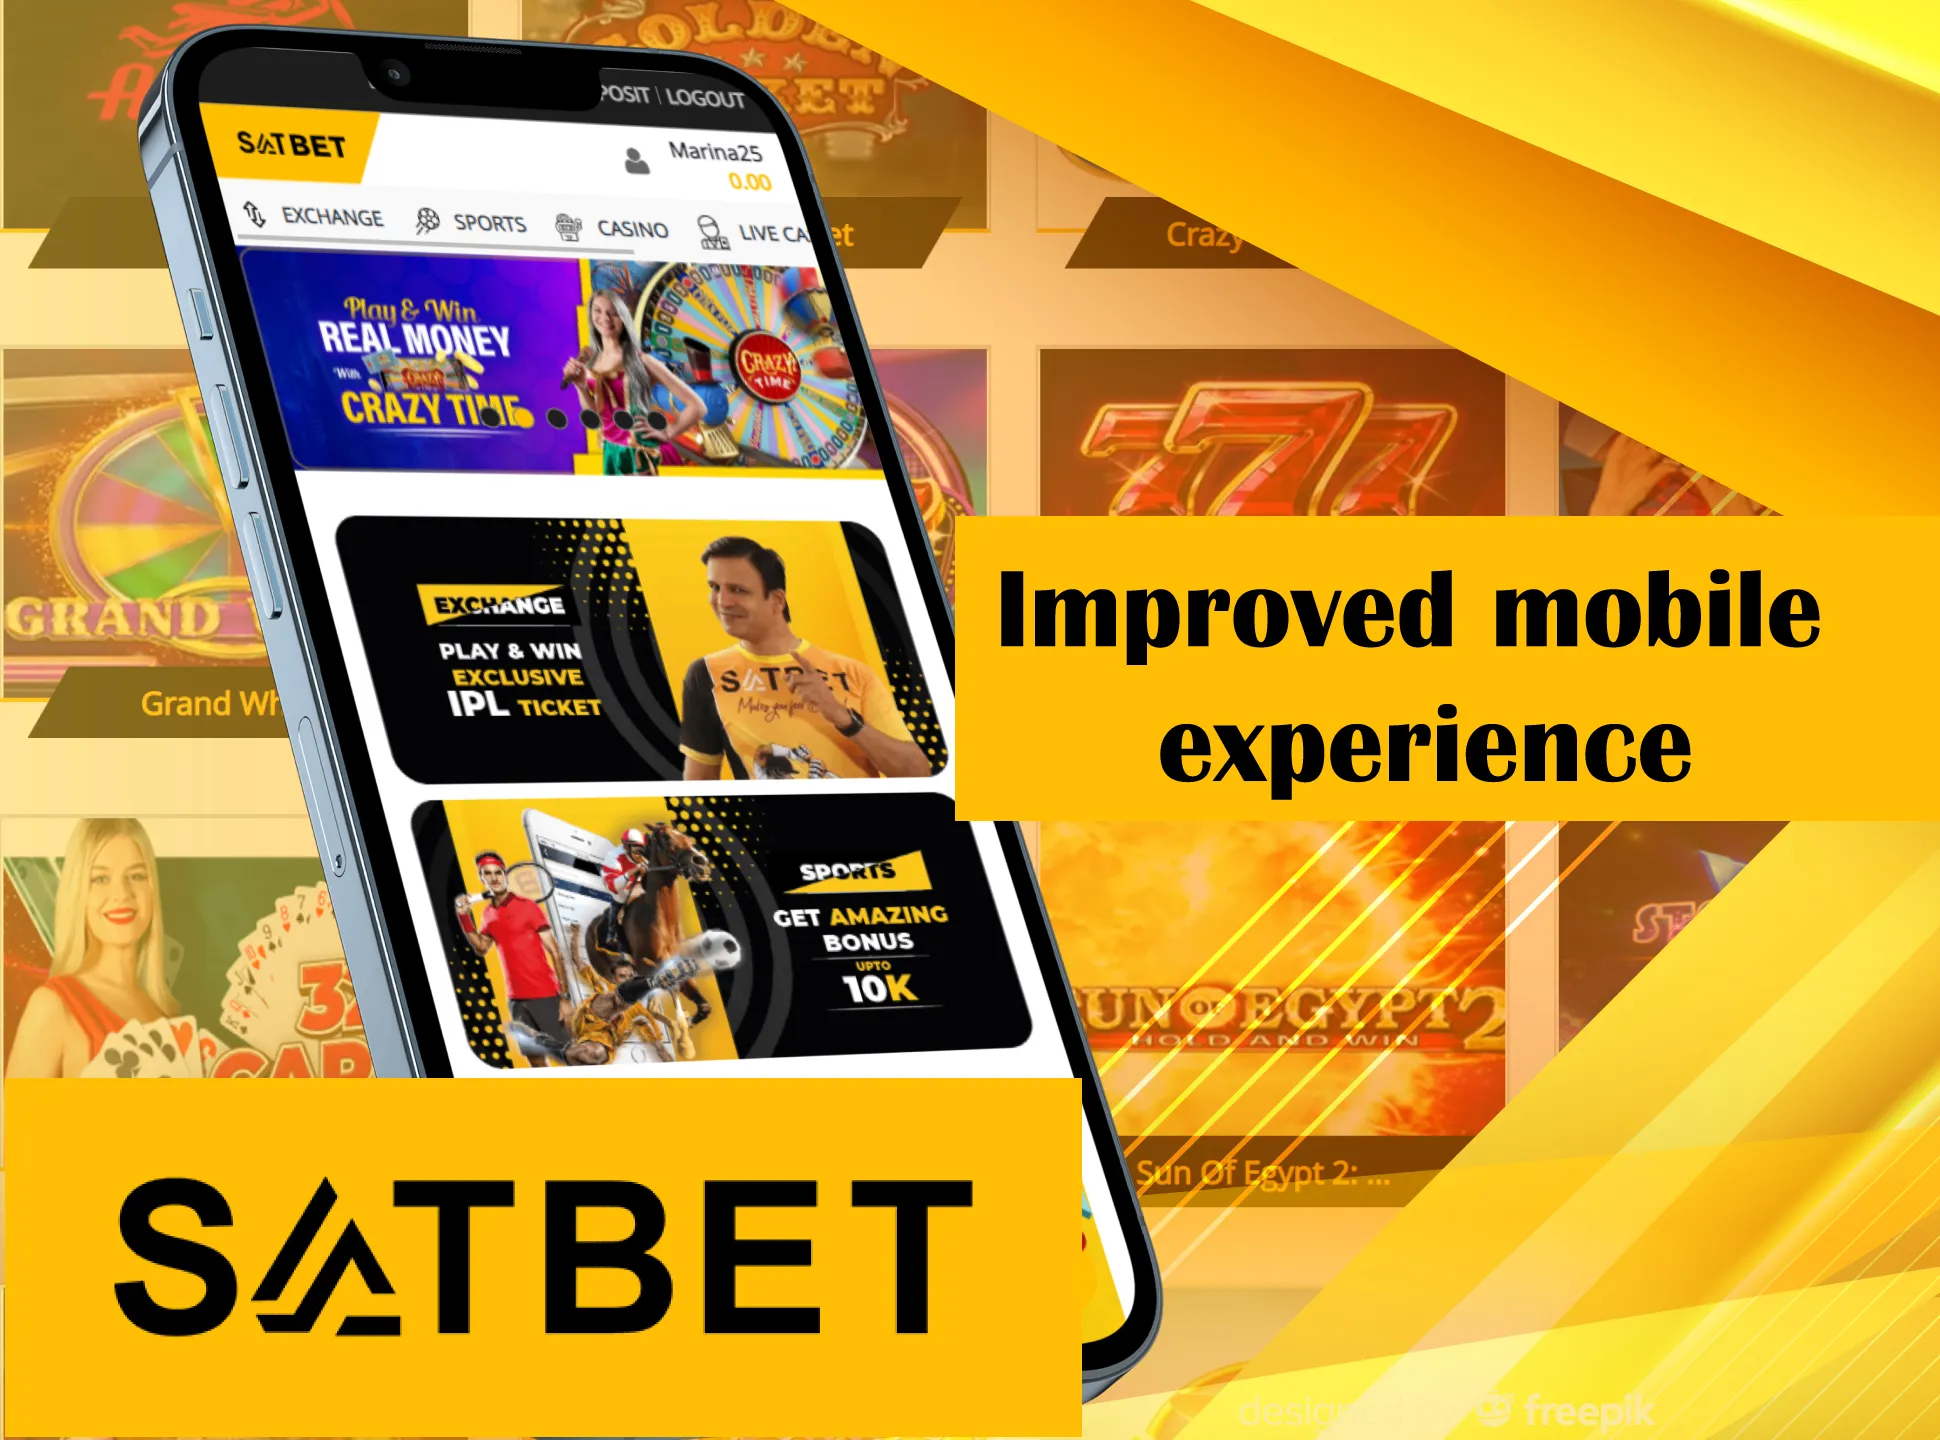 Learn more about Satbet app features.